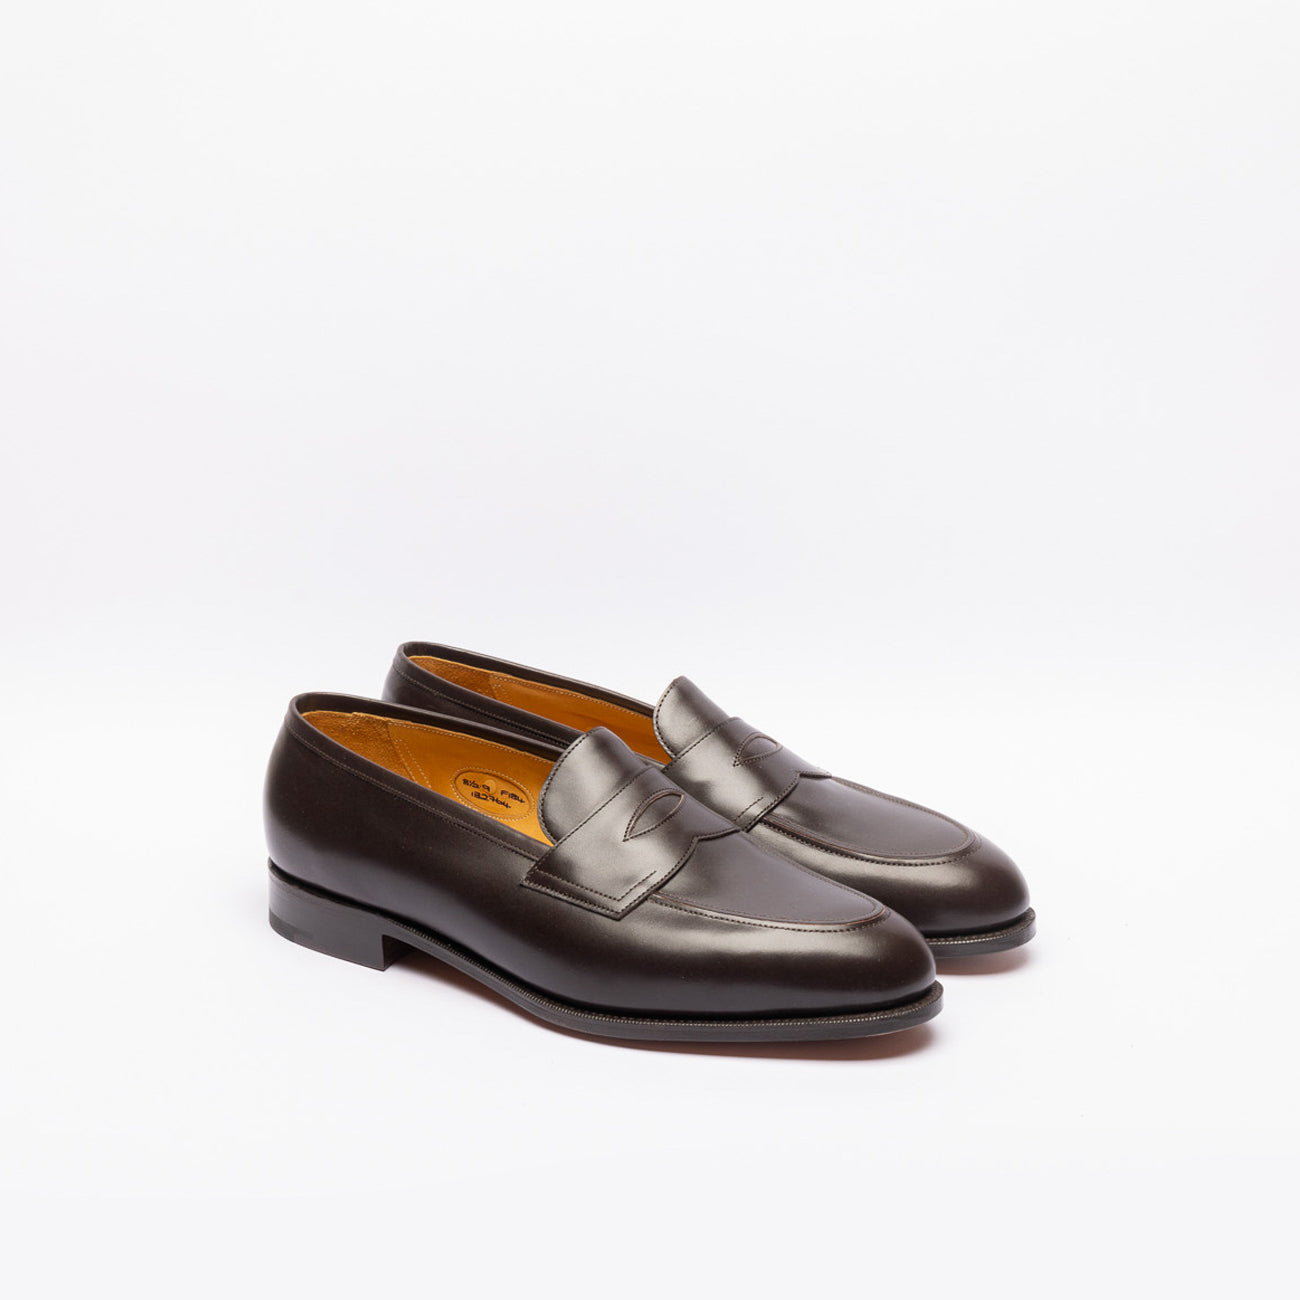 Edward Green Piccadilly penny loafers in brown leather (Espresso calf)